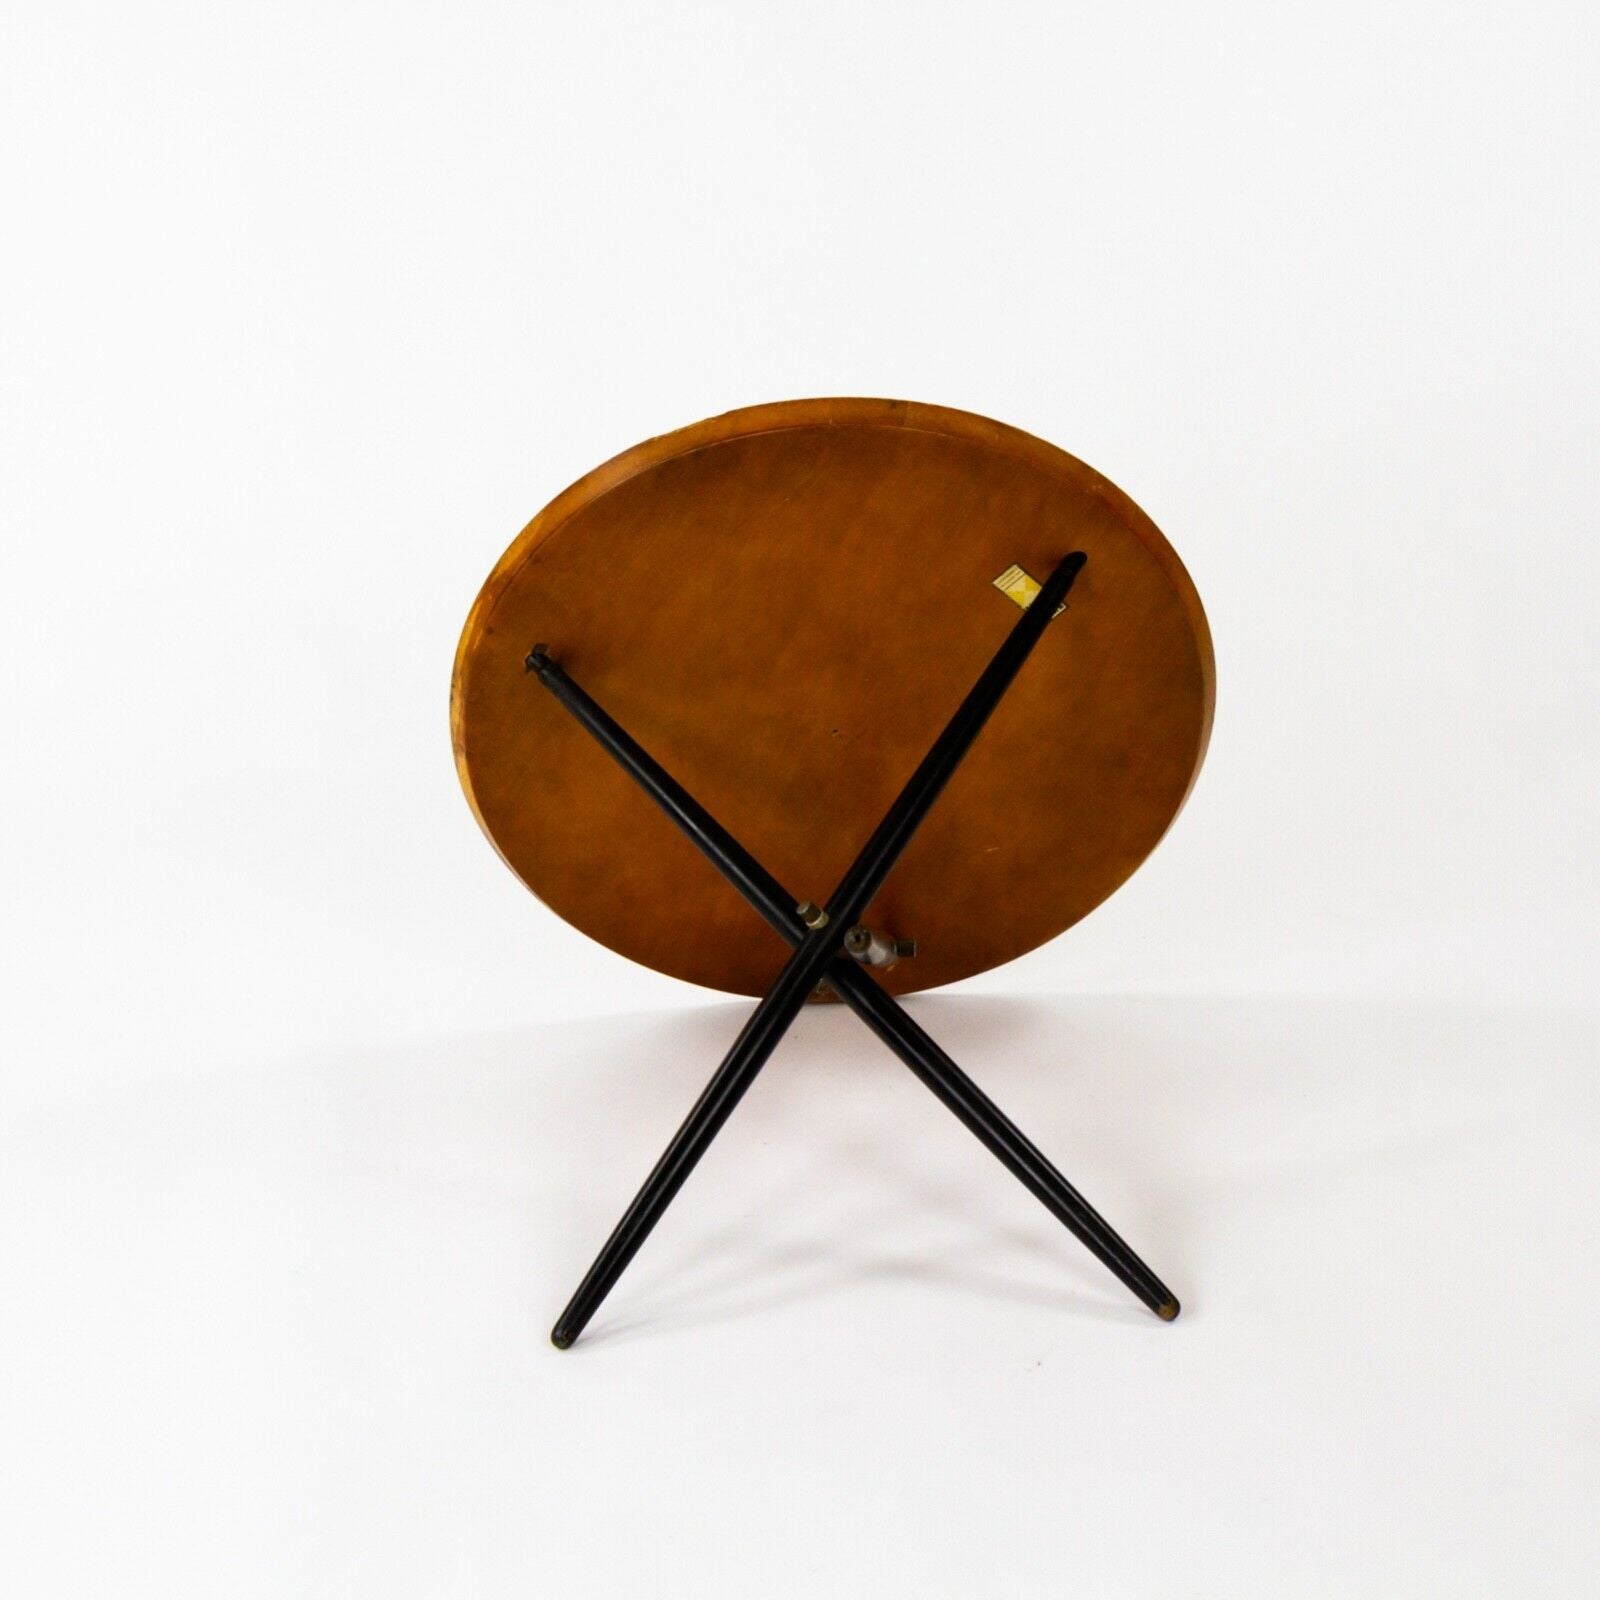 1951 Hans Bellman Small Tripod Table for Knoll Associates No 103 with 24 in Top